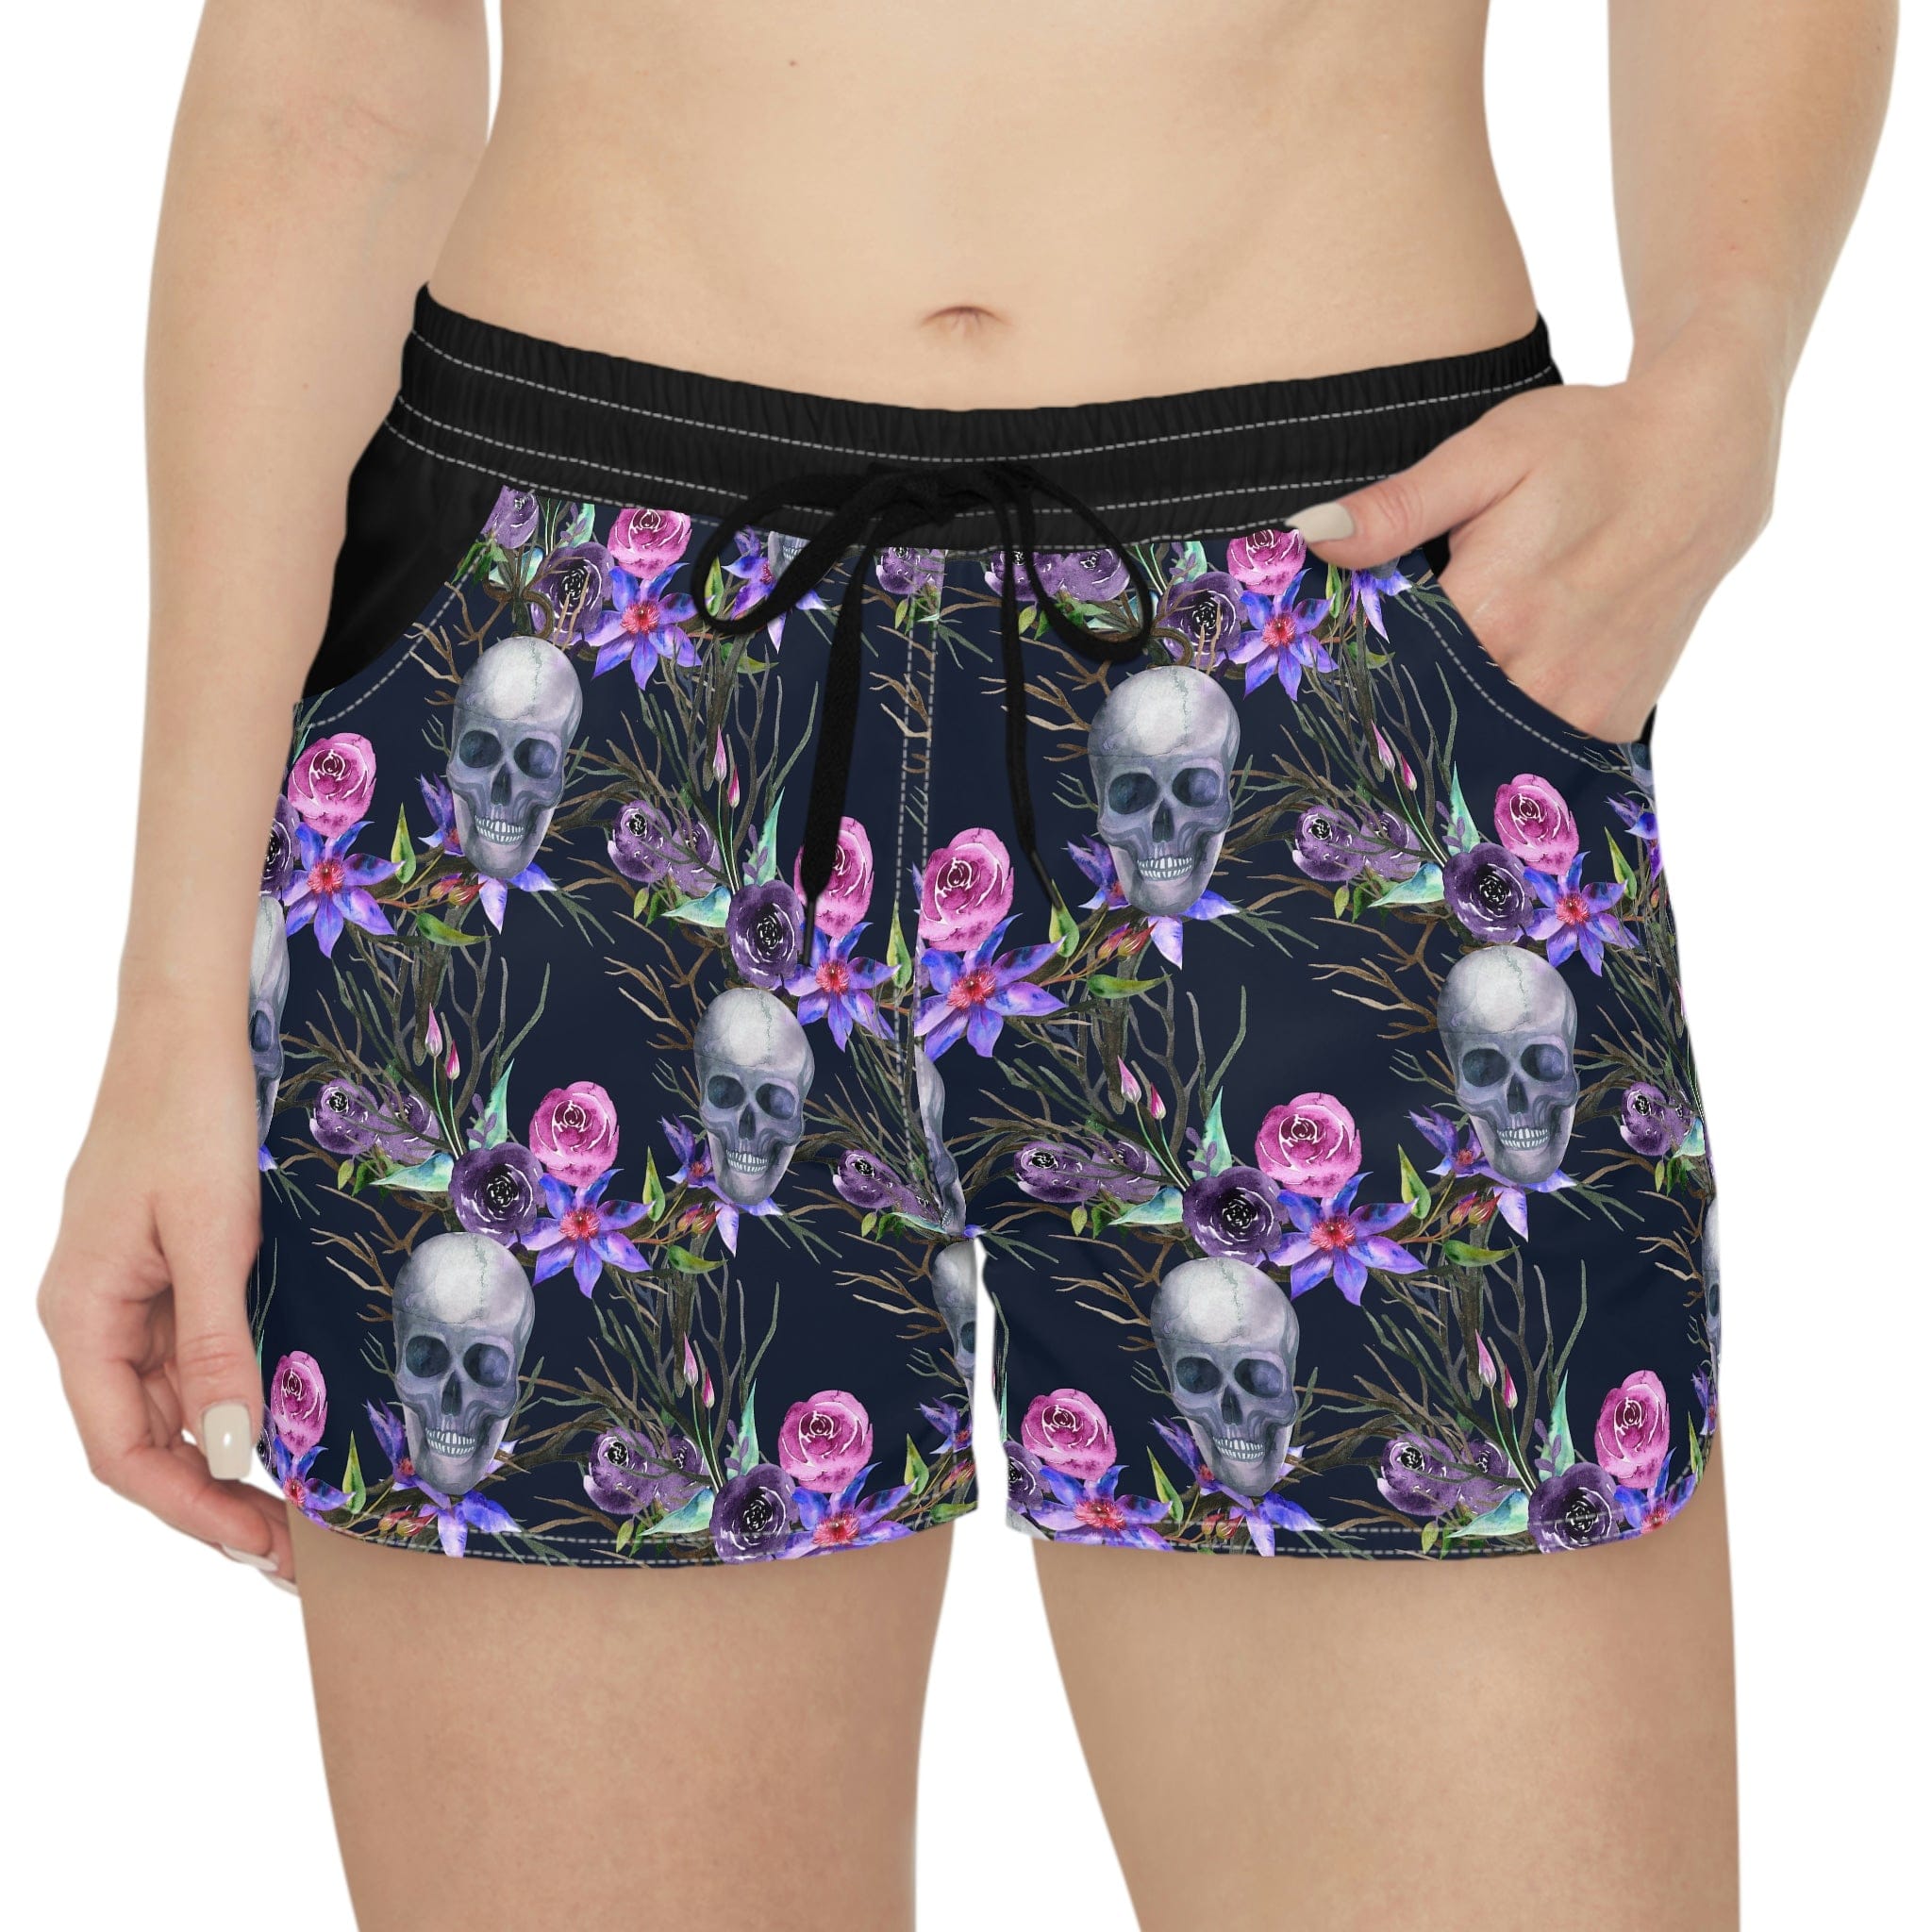 Women's Purple Skull Floral Casual Shorts